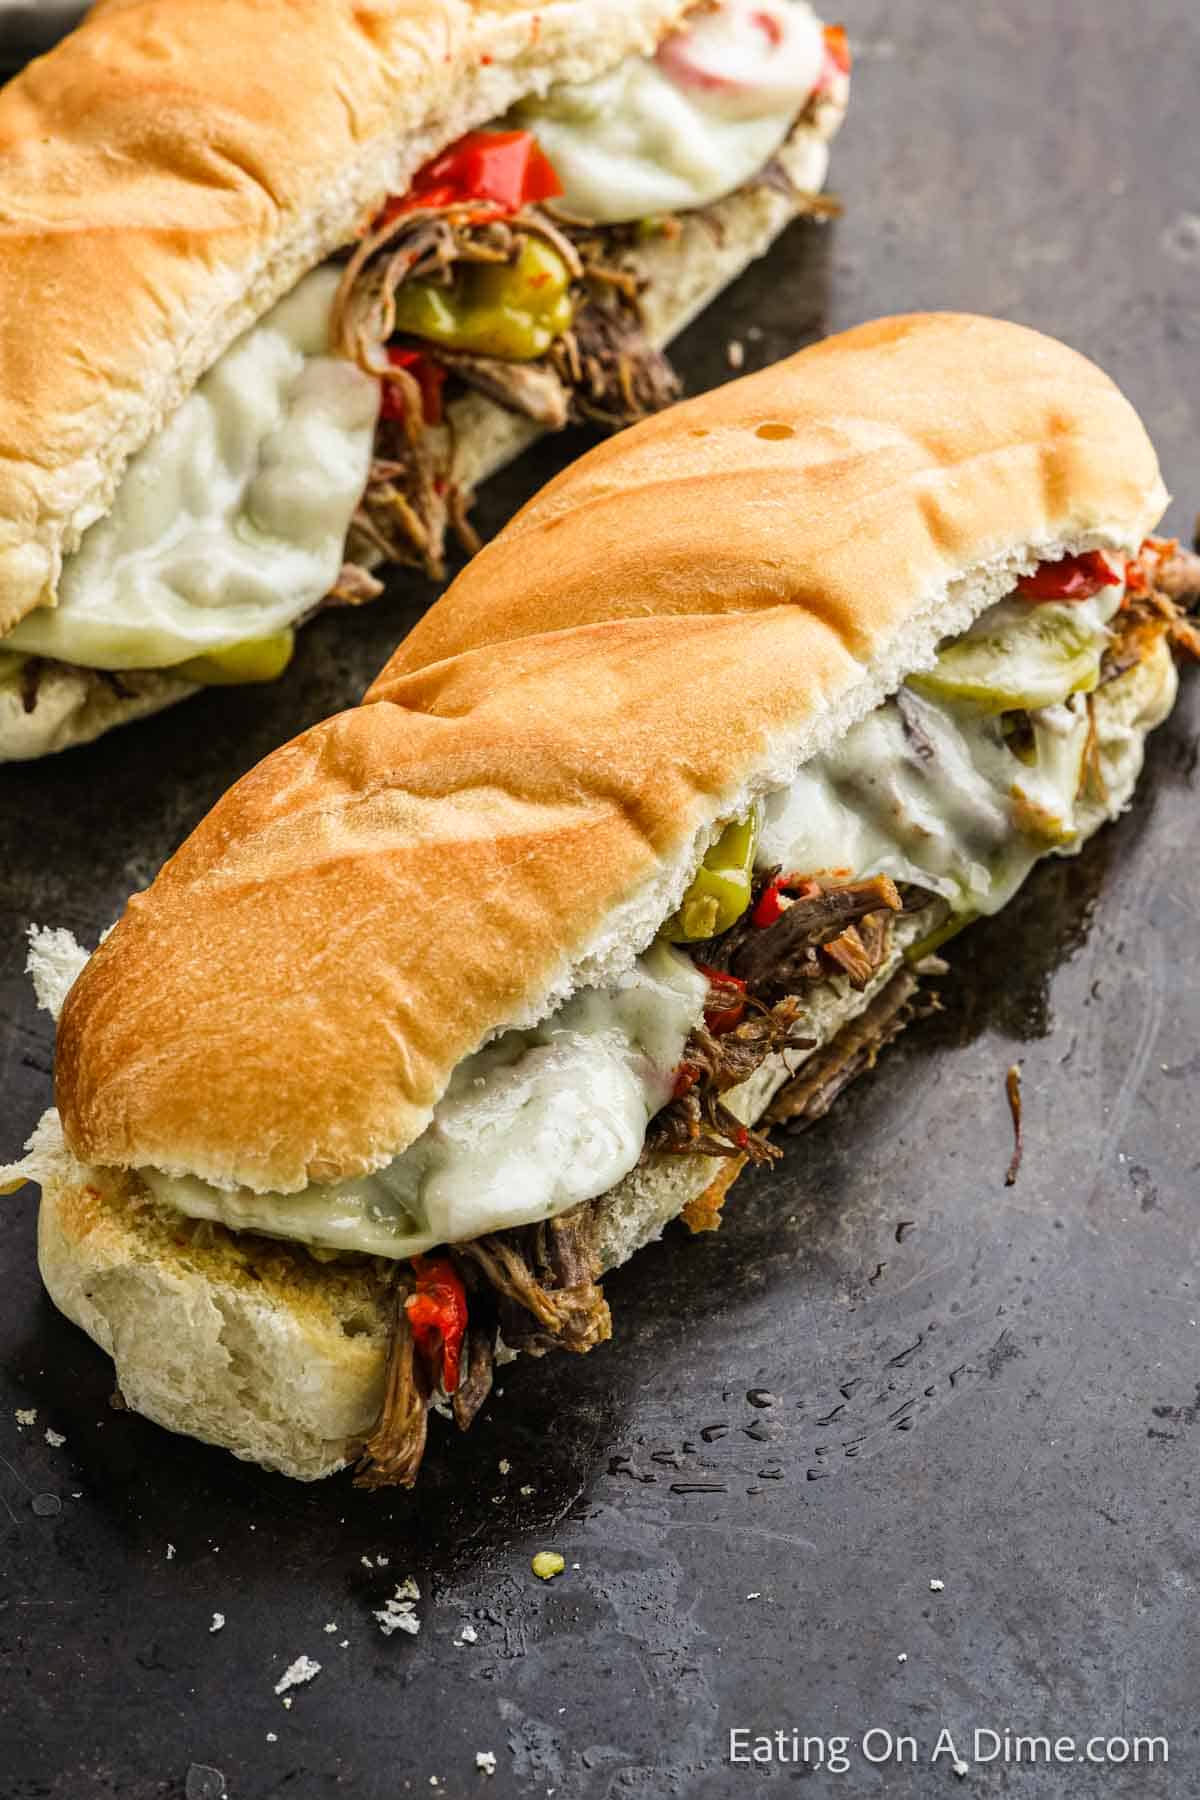 Italian Beef Sandwich topped with melted cheese and peppers and shredded beef